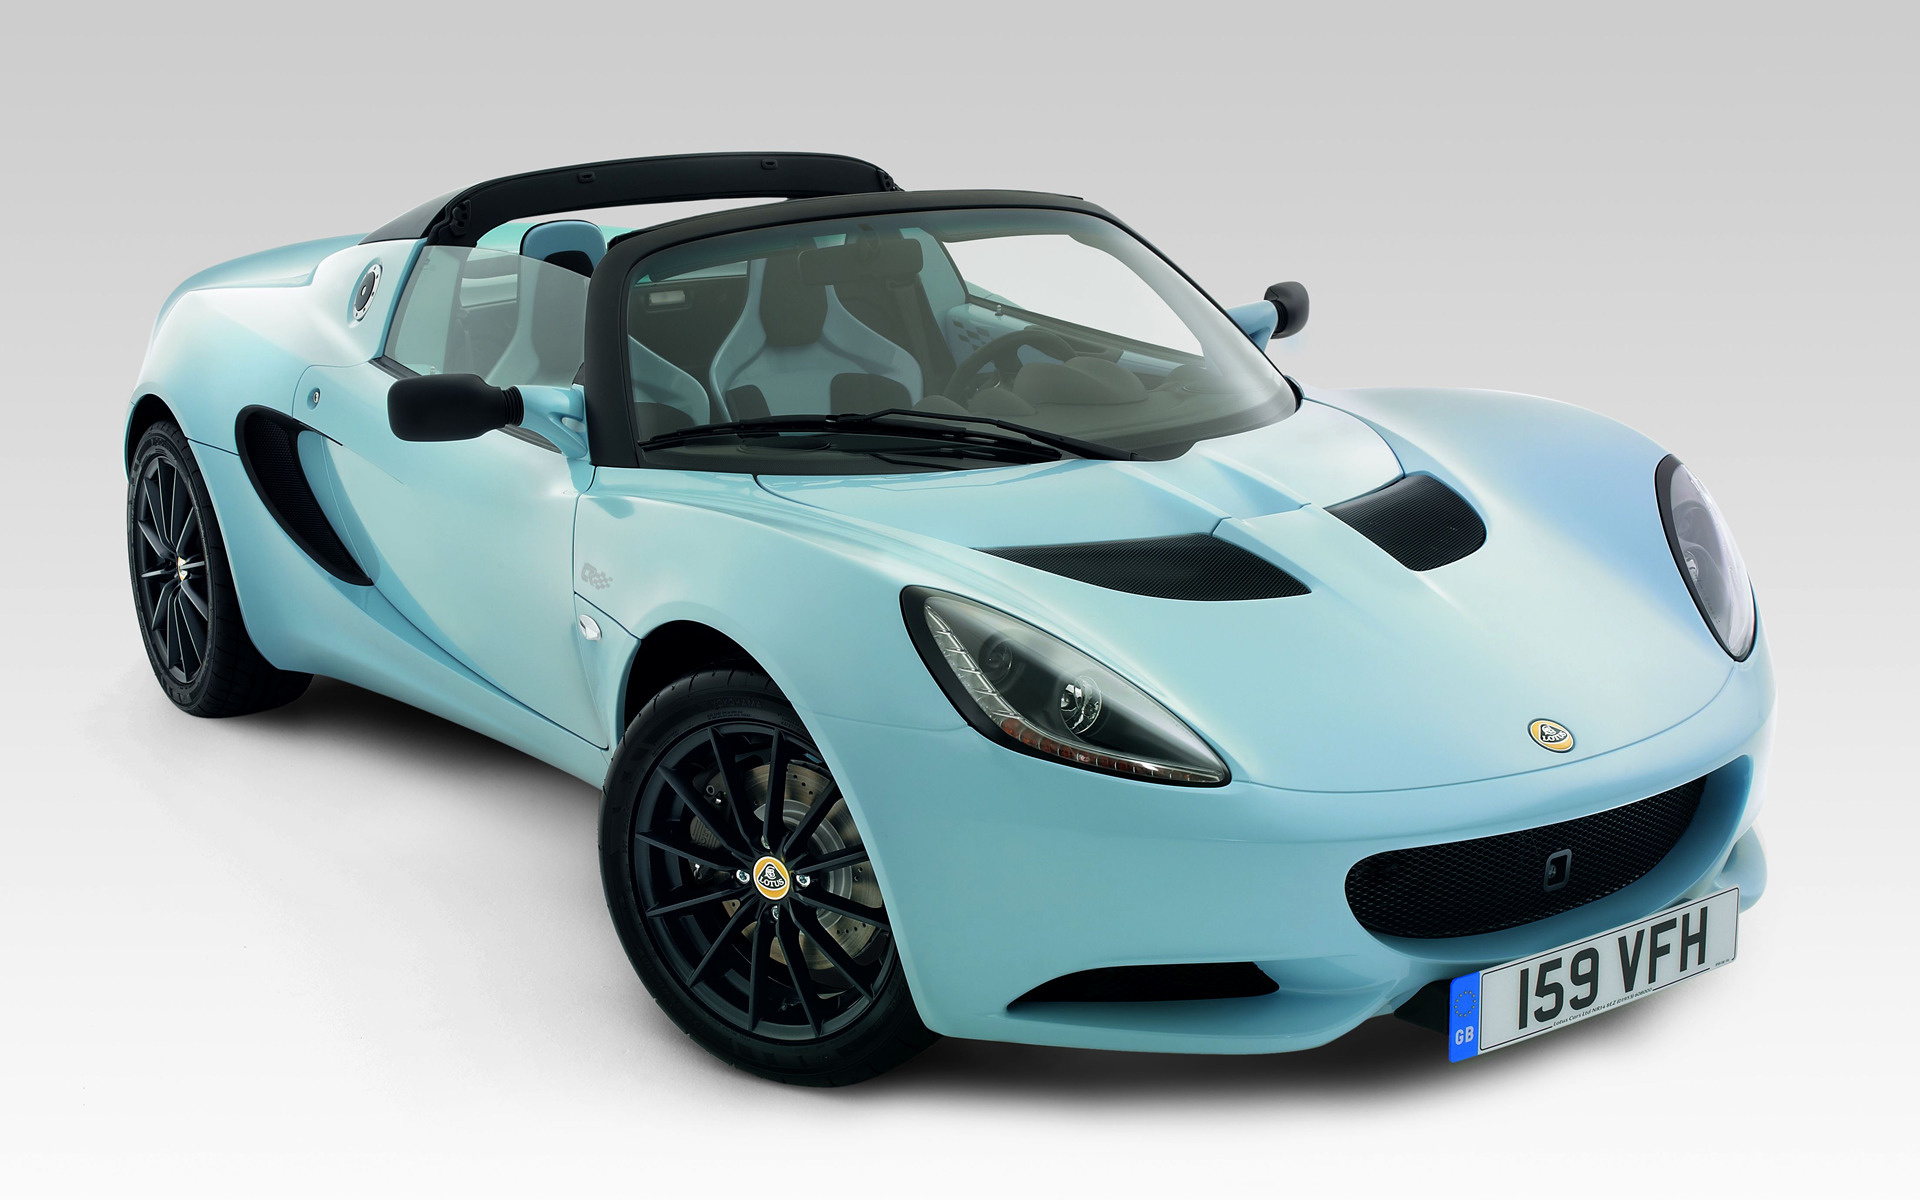 Lotus Elise Club Racer (2011) Wallpapers and HD Images - Car Pixel